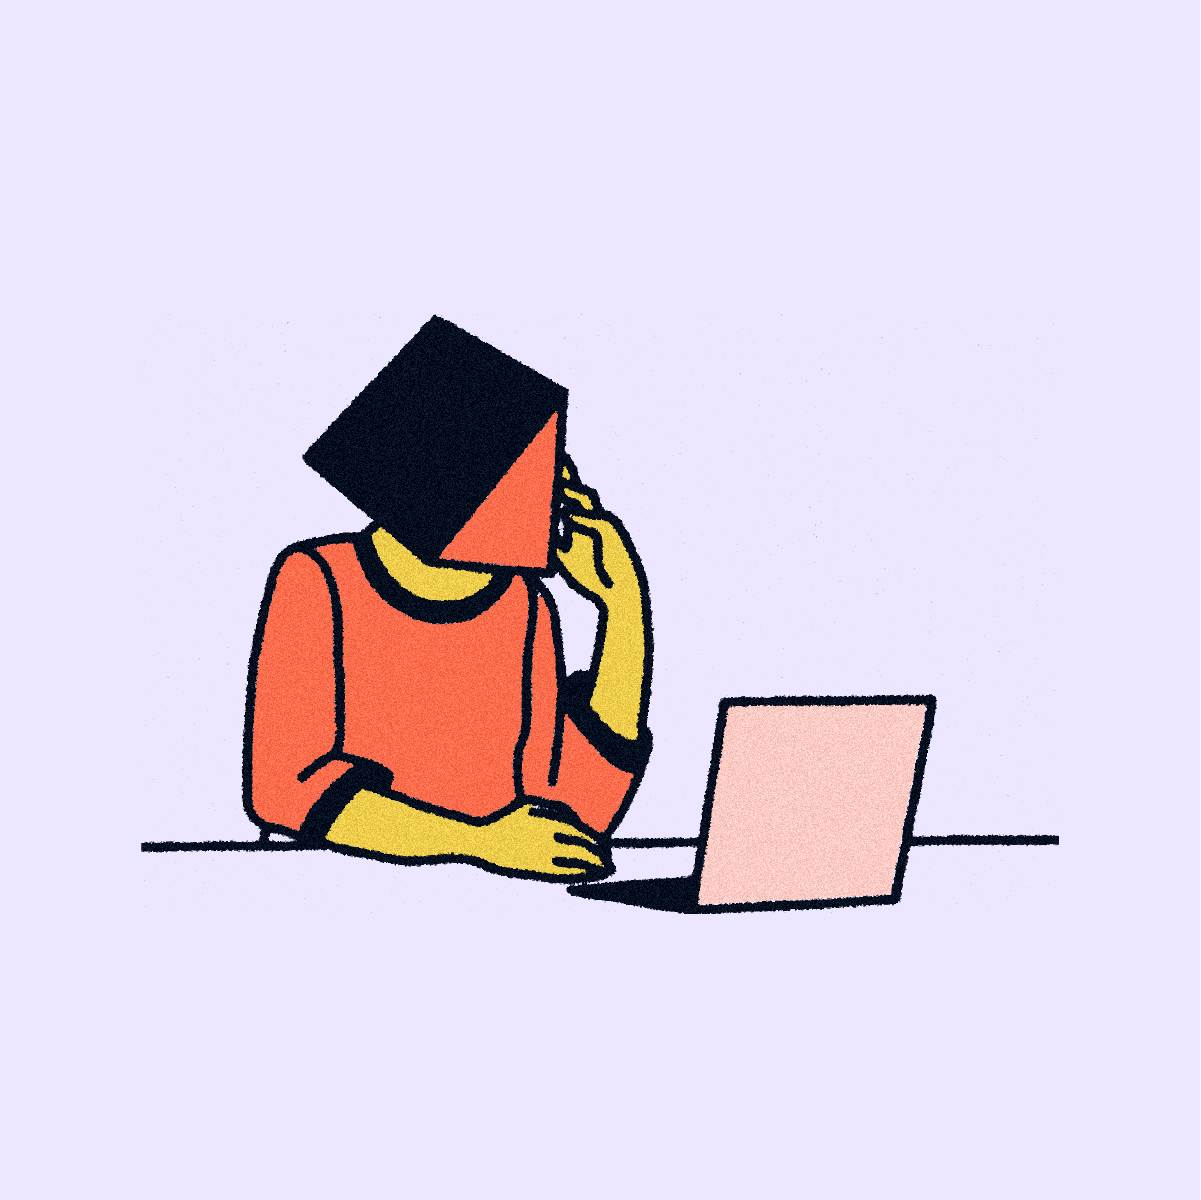 Illustrated person with a shape instead of a head looking at a laptop